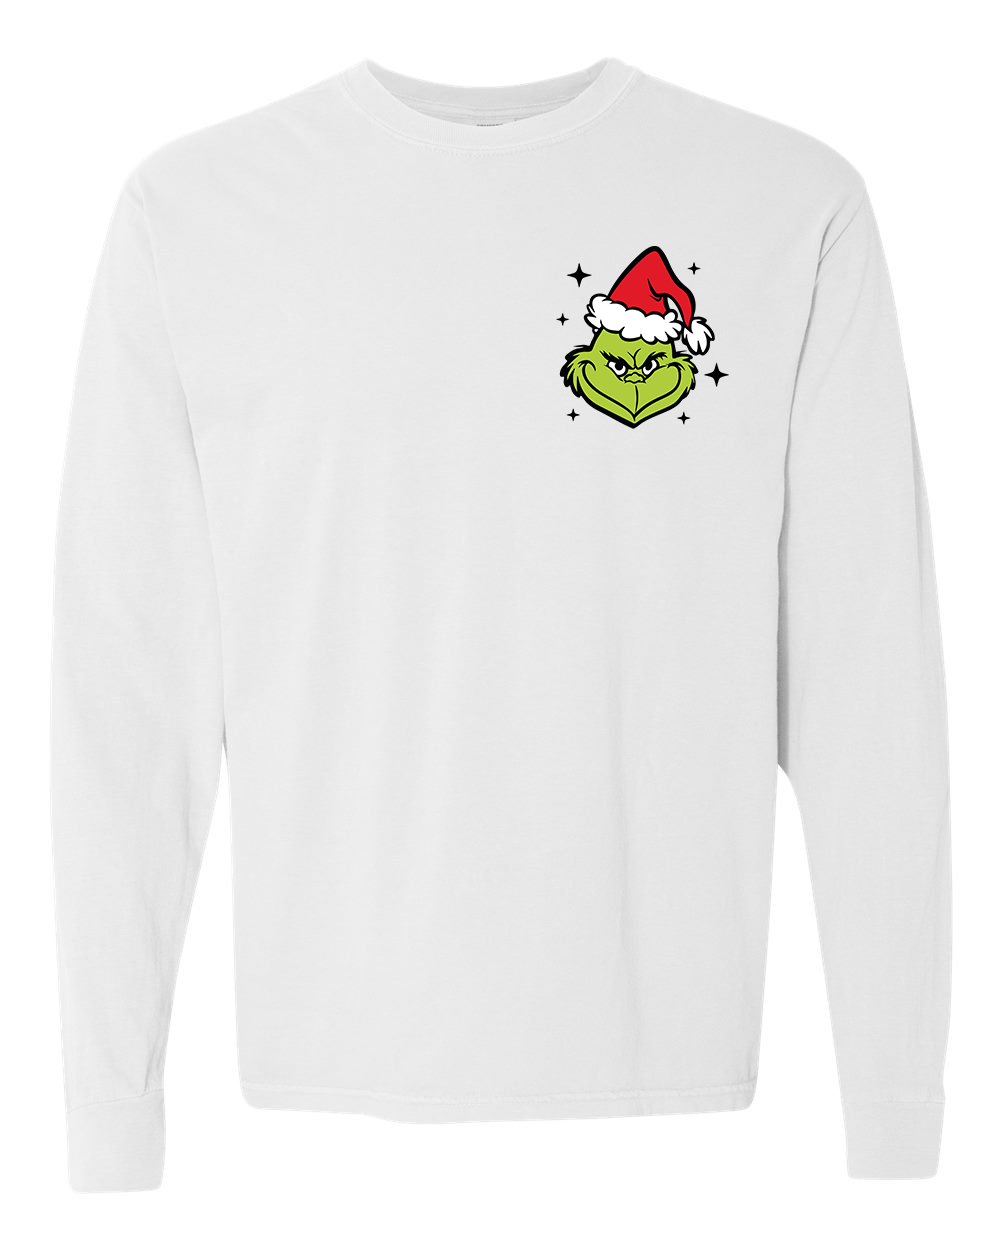 In My Grinchy Mama Era Double Sided Long Sleeve Tee - White